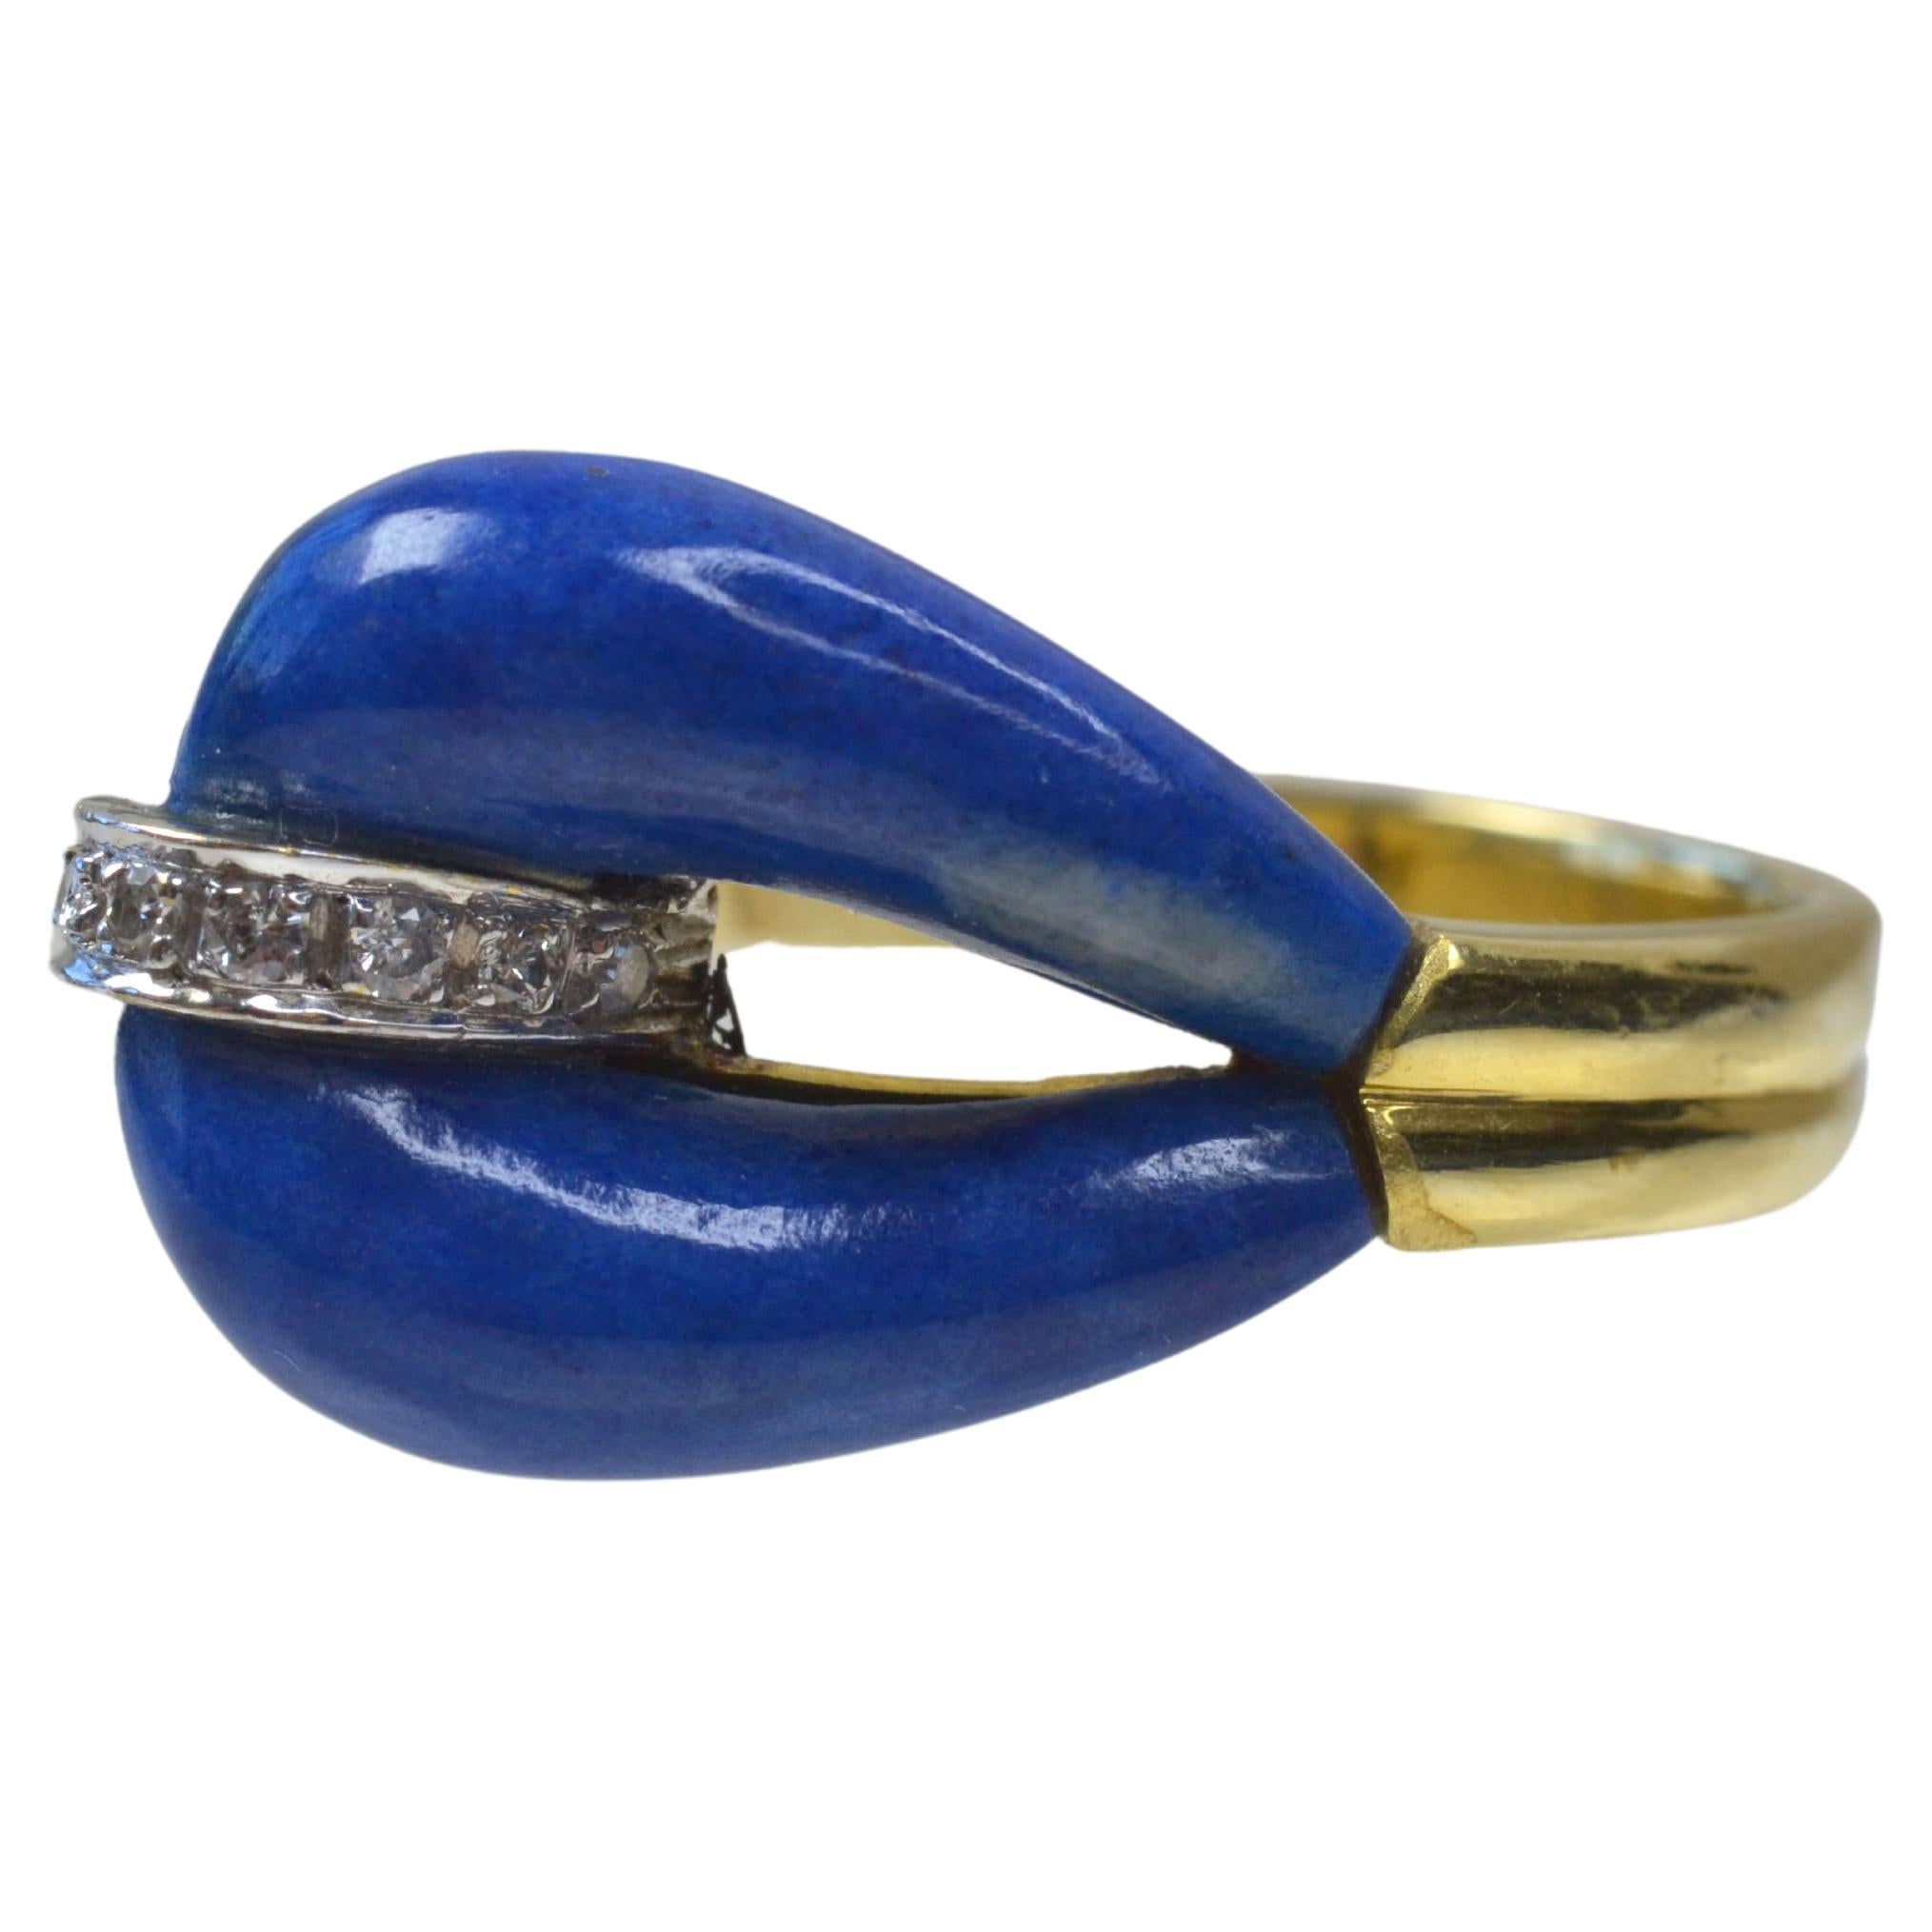 Vintage 14k Gold Lapis Lazuli Teardrop Ring with Diamonds, One-of-a-kind For Sale